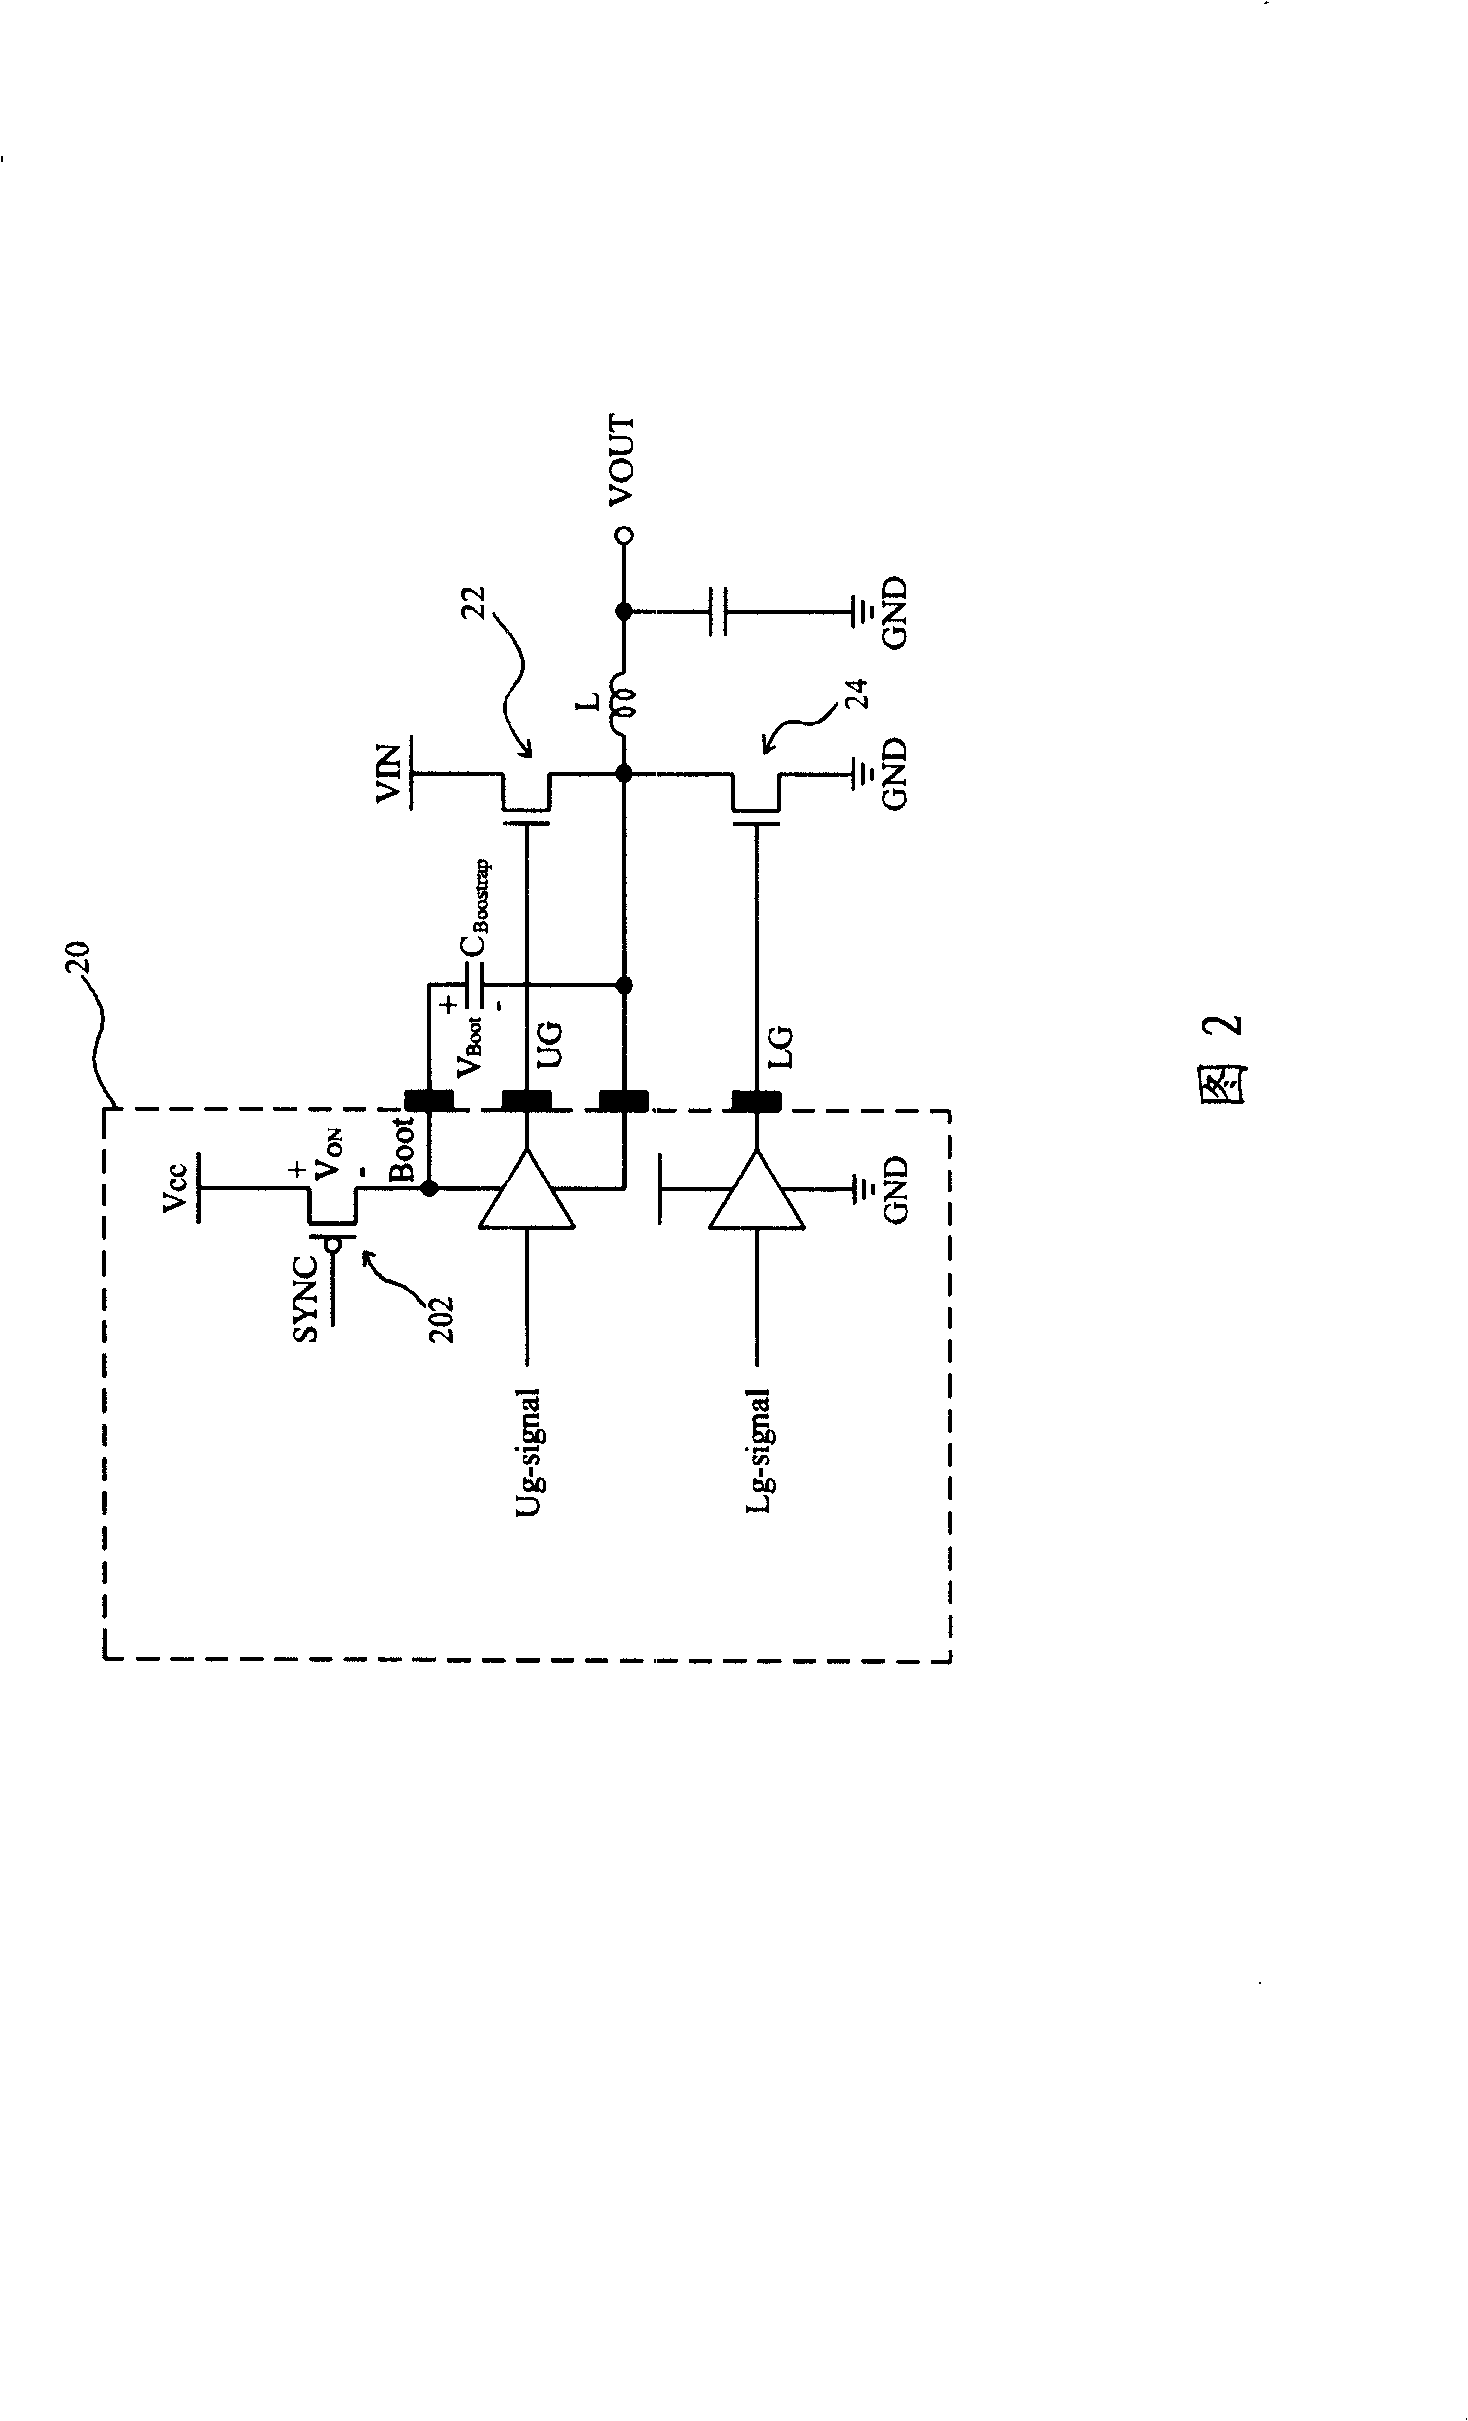 Circuit for charging bootstrap capacitor of voltage converter